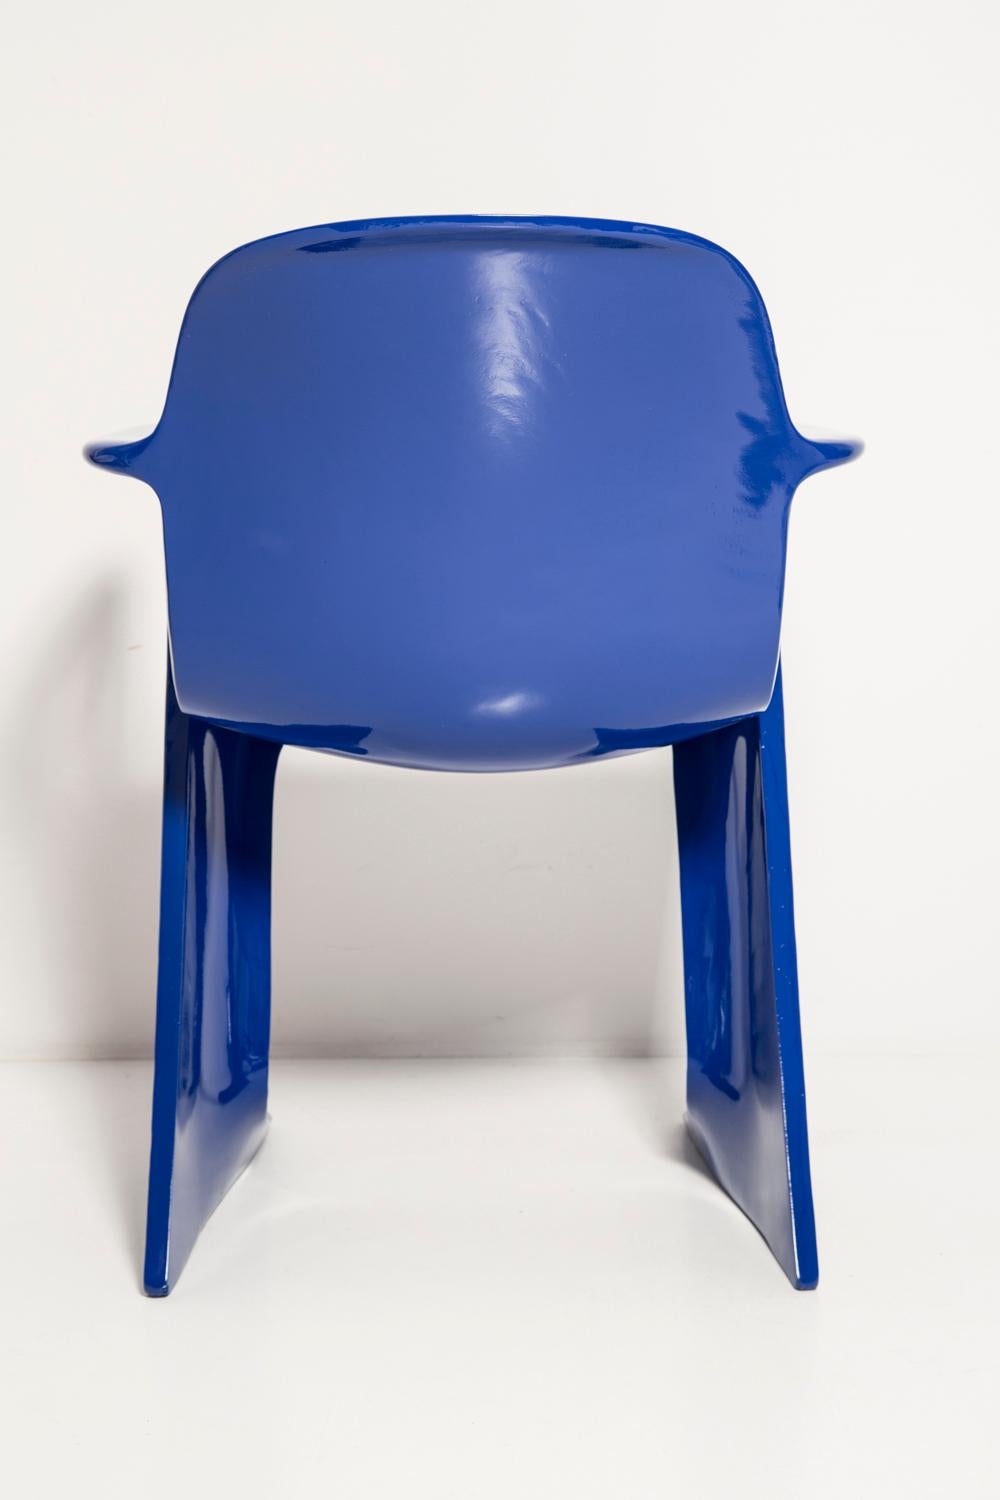 Pair of Ultramarine Blue Kangaroo Chairs Designed by Ernst Moeckl, Germany, 1968 In Excellent Condition For Sale In 05-080 Hornowek, PL